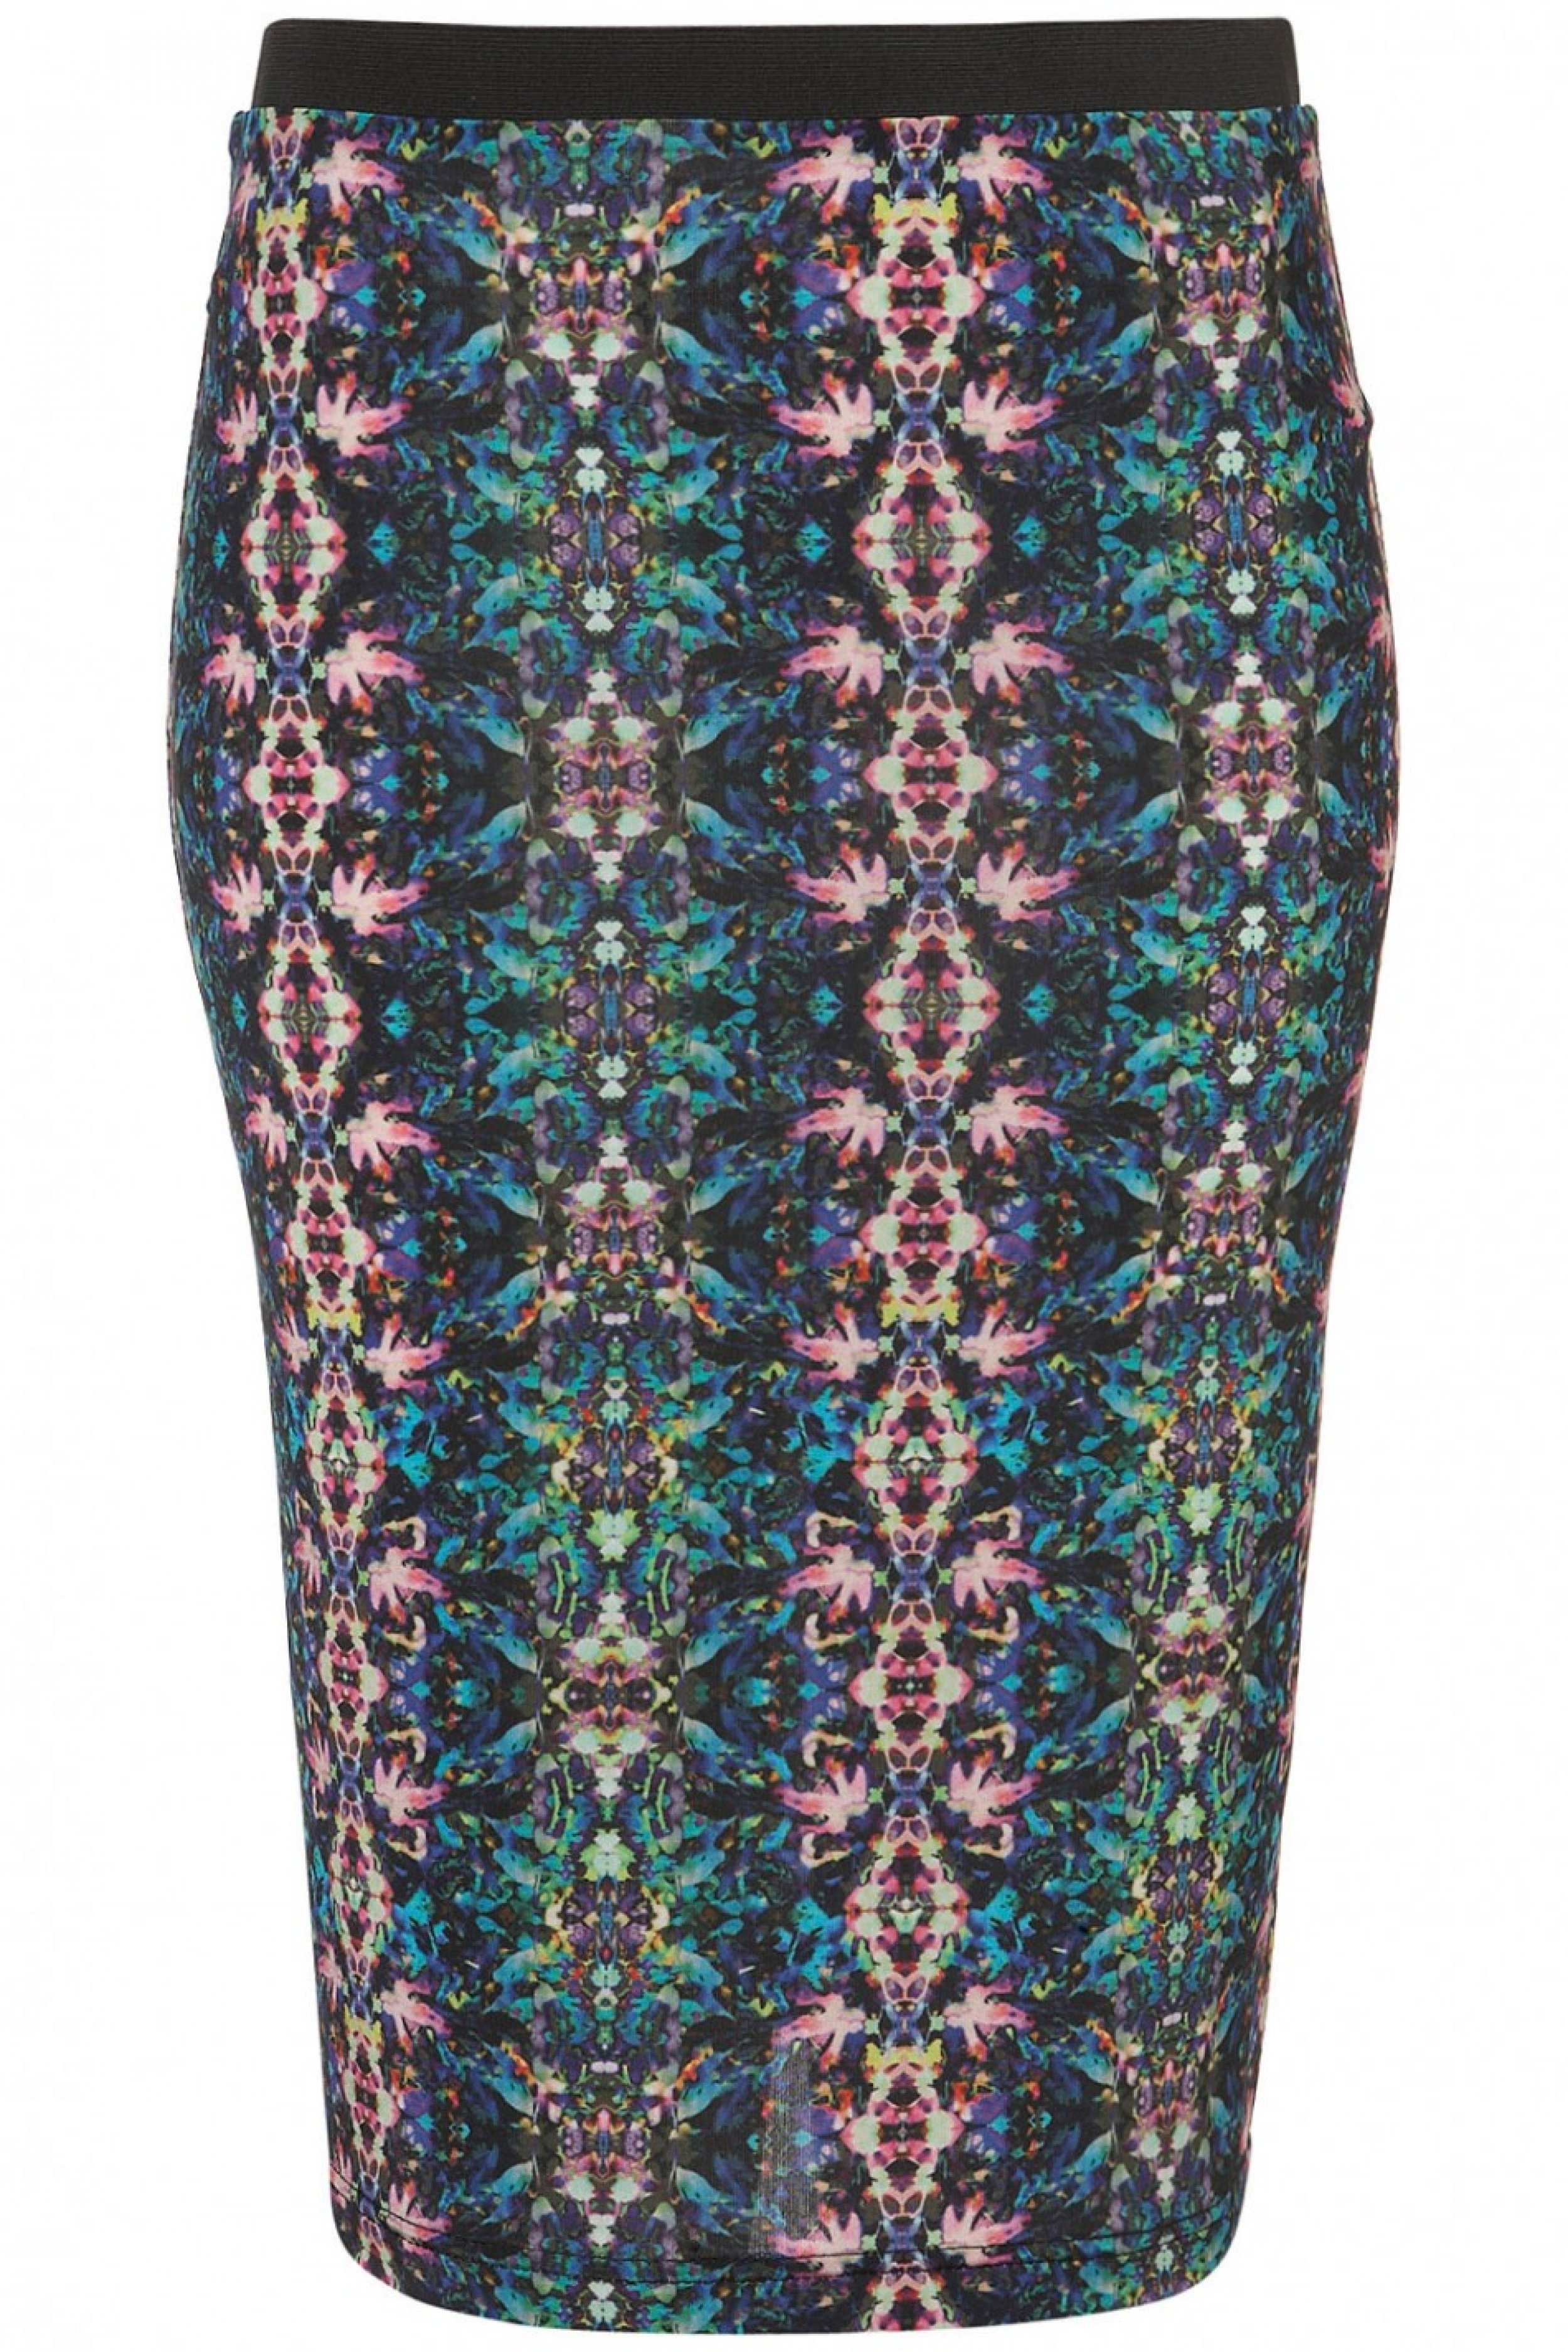 Topshop Previews 8 Top Trends for Spring 2012